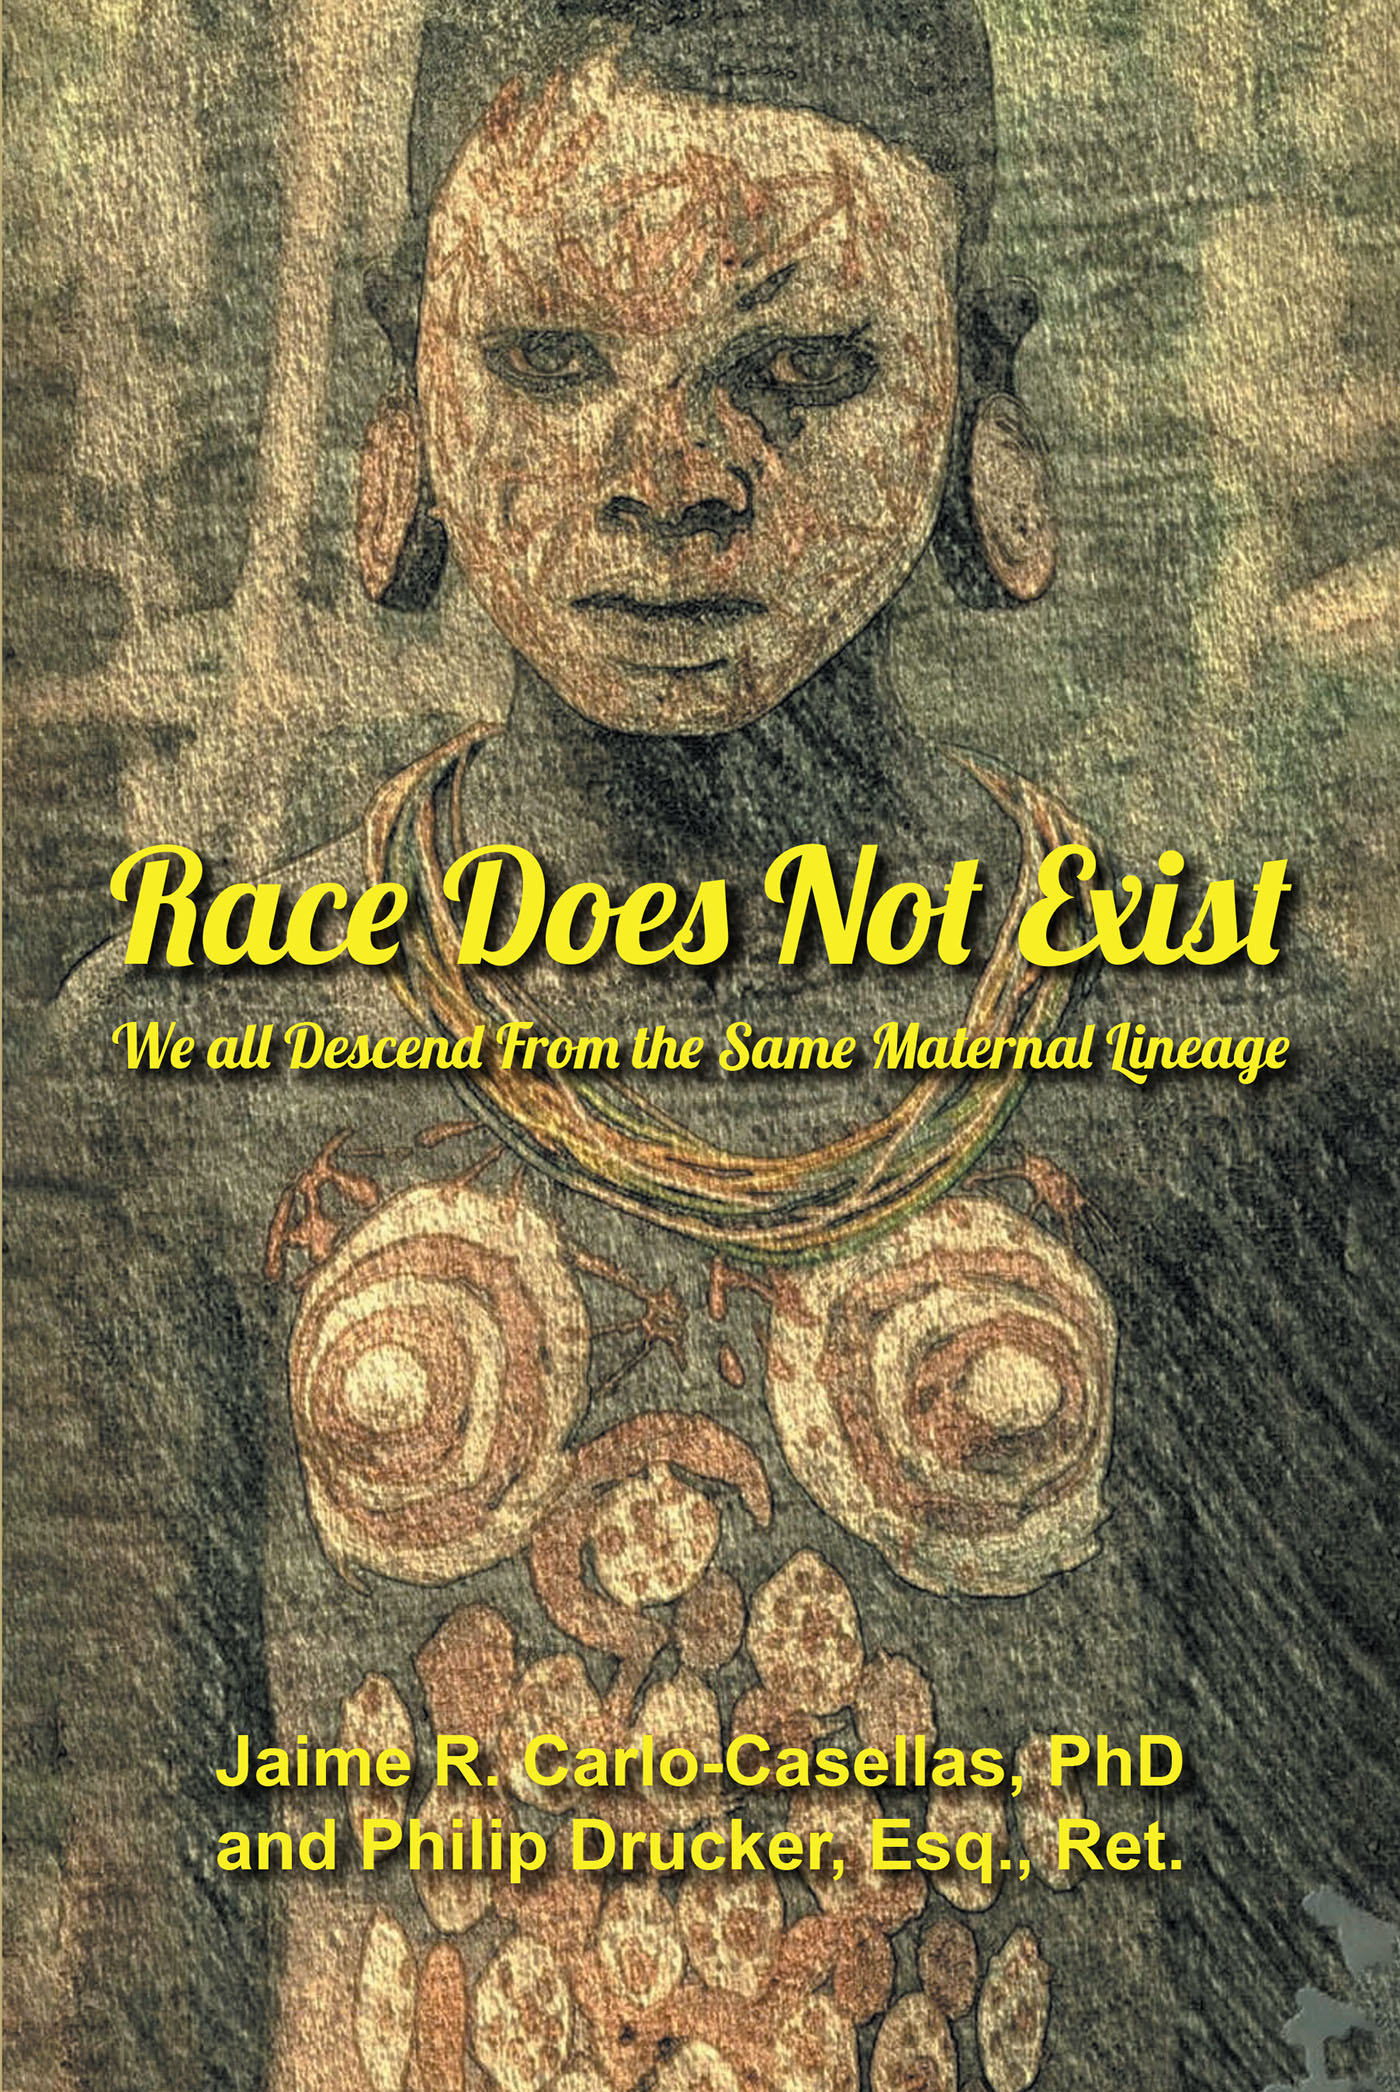 Authors Jaime R. Carlo-Casellas, Ph.D. and Philip Drucker, Esq., Ret.’s New Book, “Race Does Not Exist,” Explores How Race is But a Social Construct Used to Divide Humans